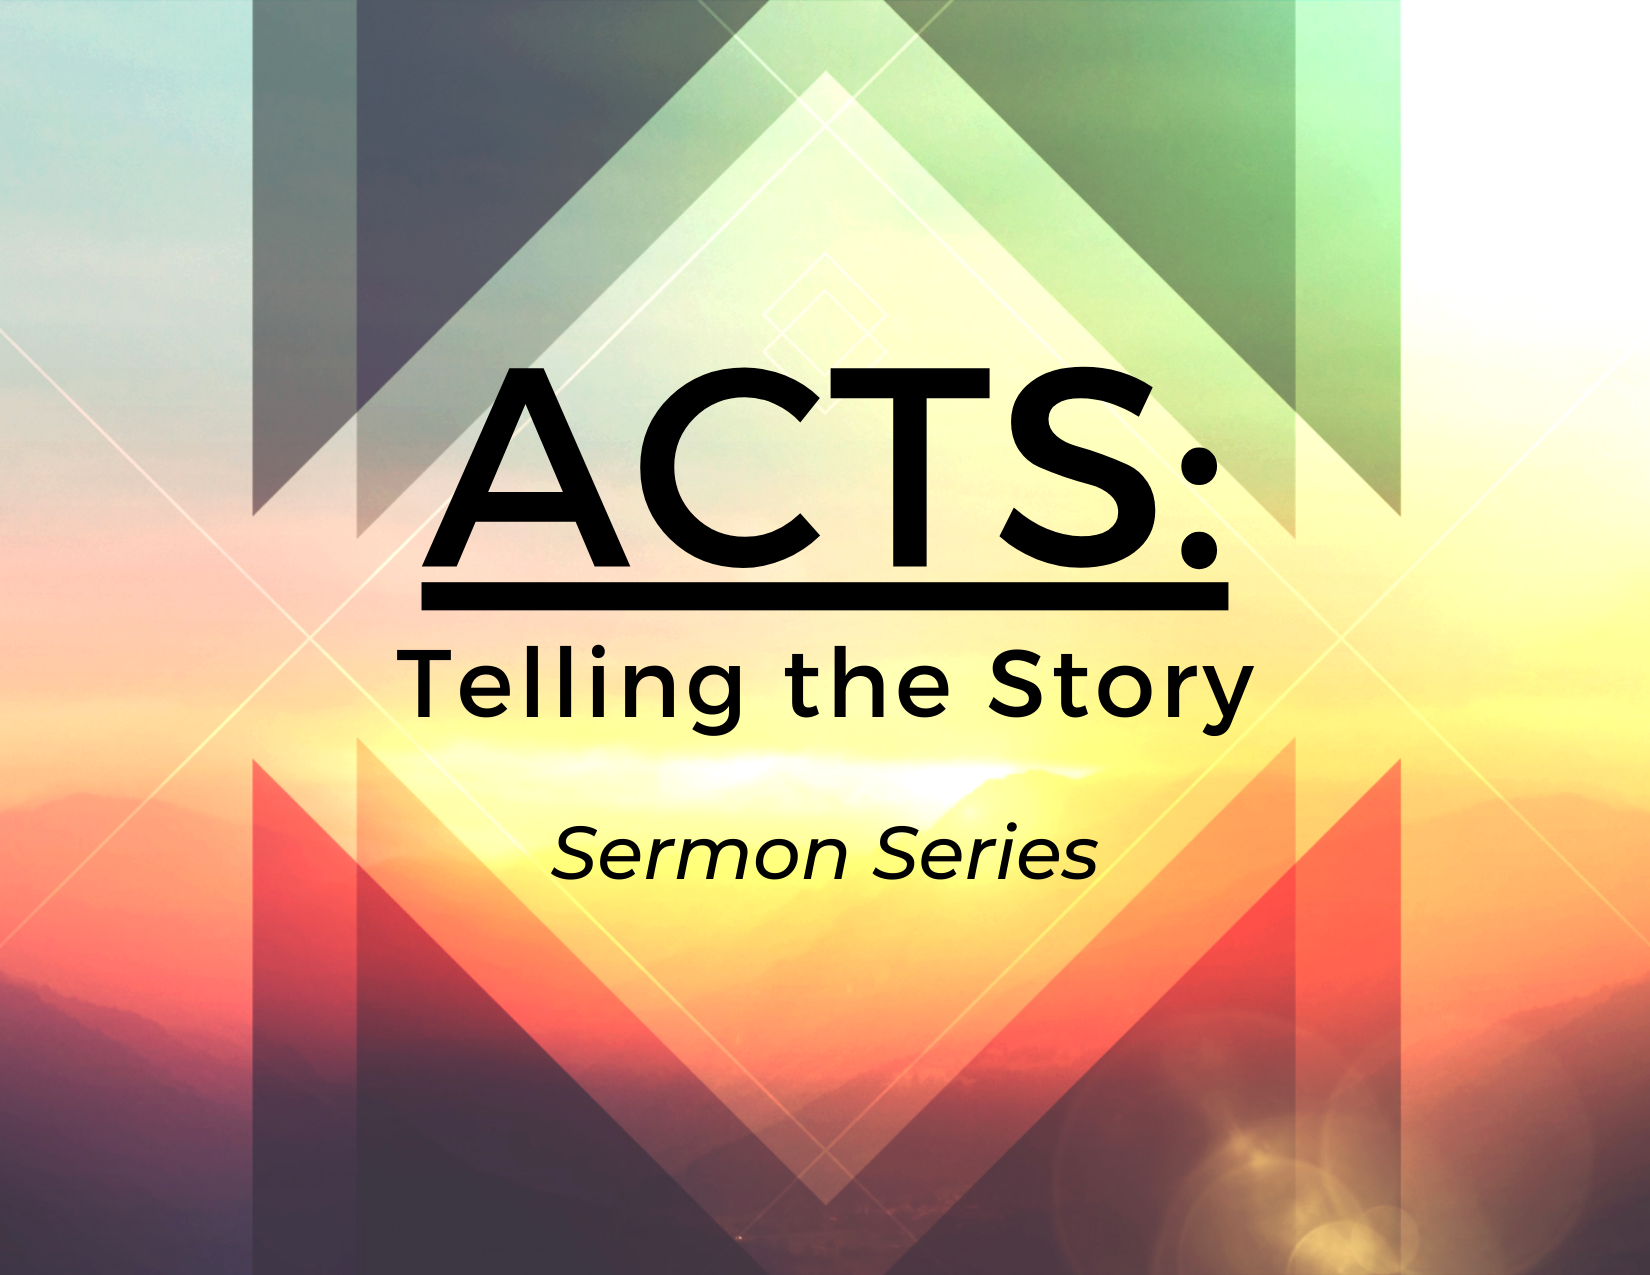 "Acts: Telling the Story" 6th in Series